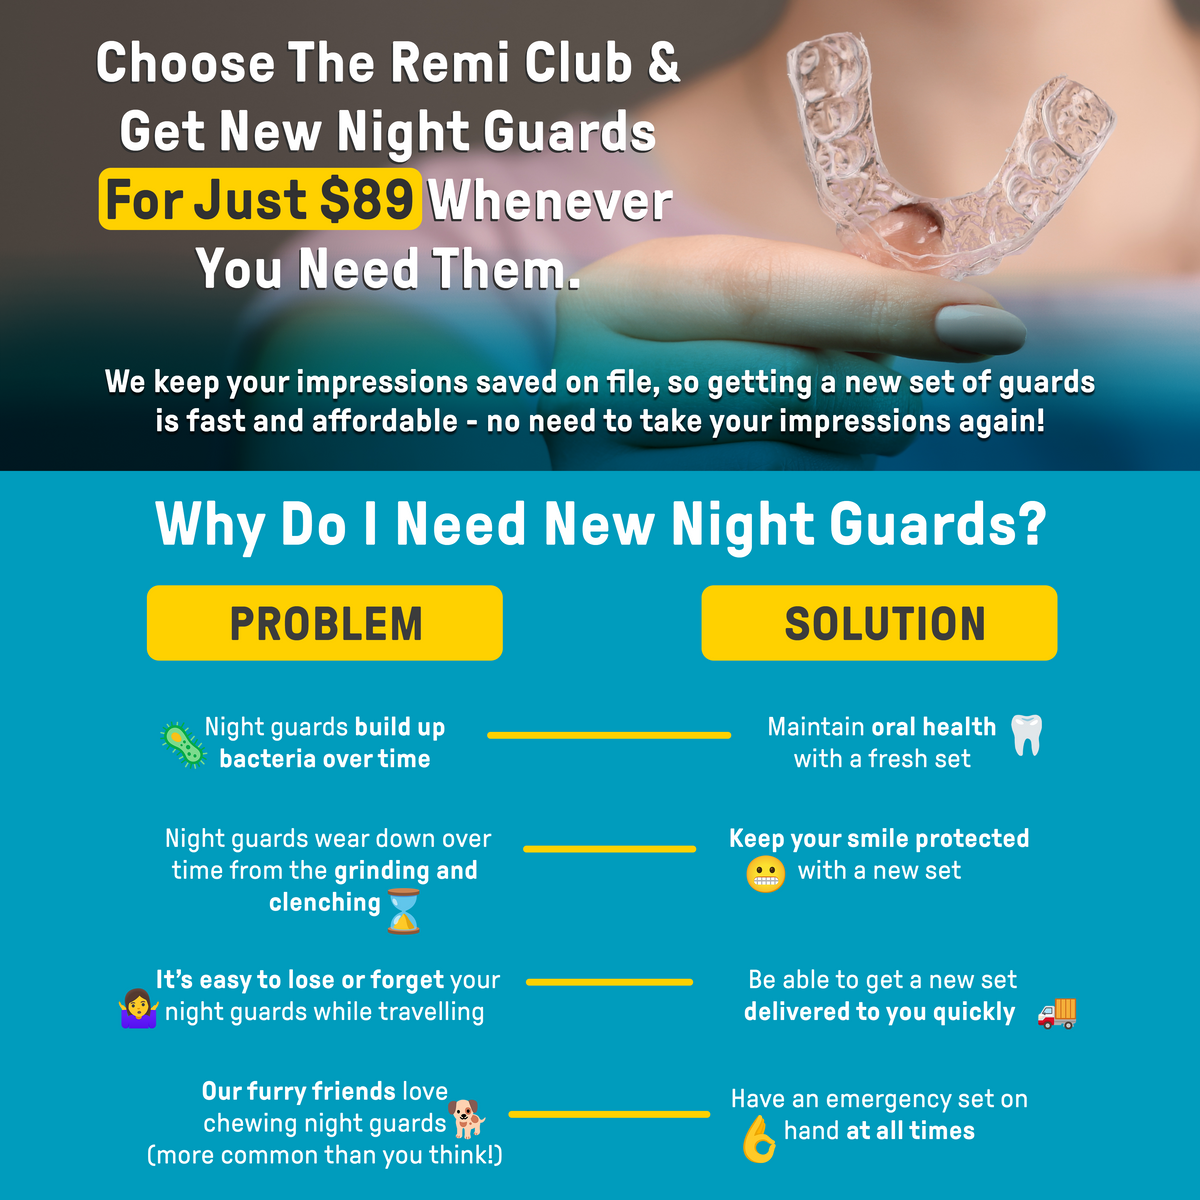 A promotional graphic highlights a Custom Night Guards offer for $89 with the Remi Club. It lists problems like teeth grinding and bacteria buildup, and solutions such as maintaining oral health with dental-grade quality and easy reordering.